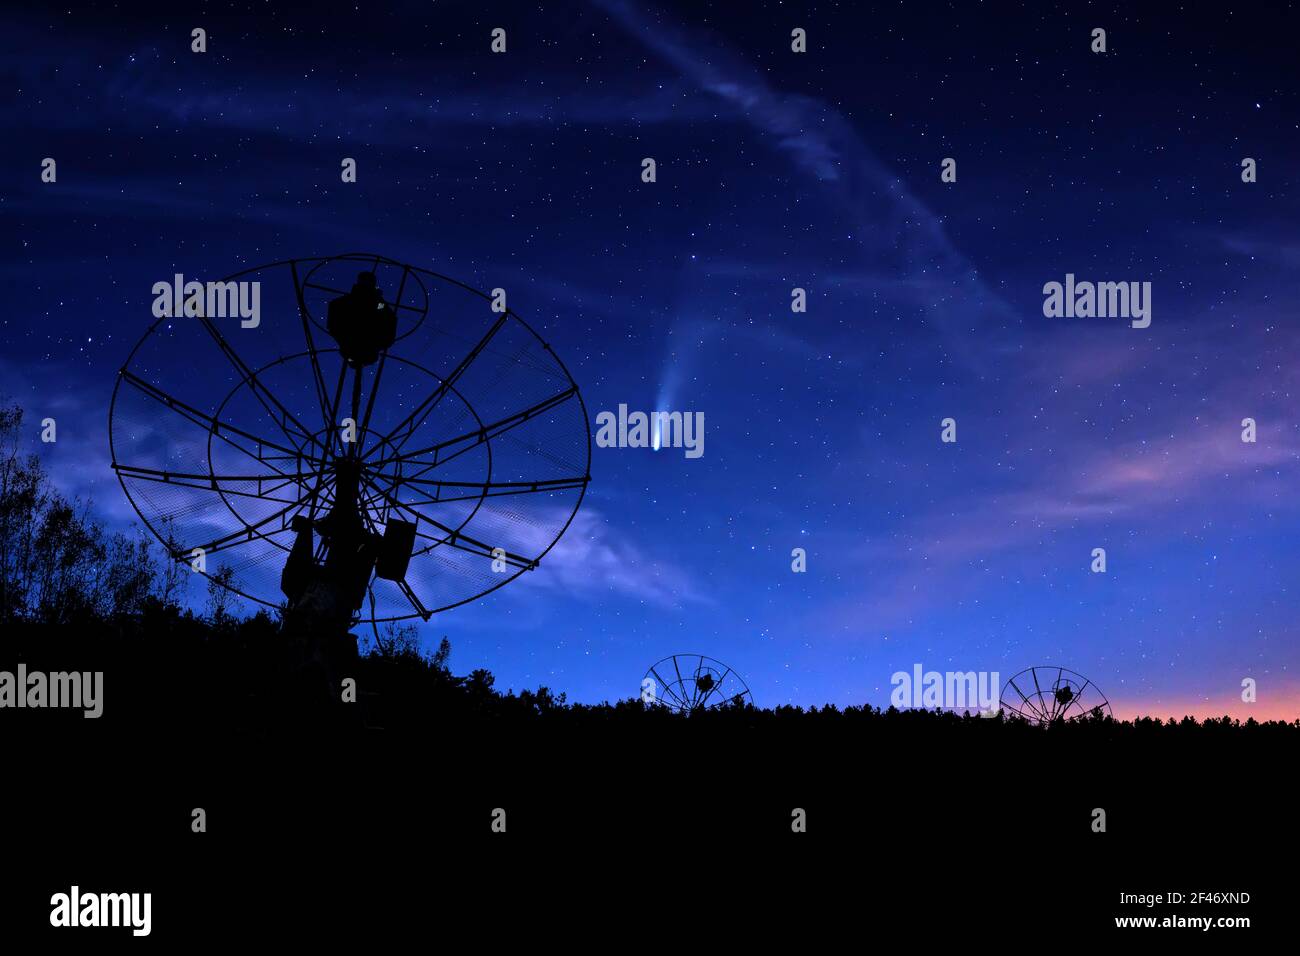 radiotelescopes silhouettes under night starry cloudy sky background Stock Photo